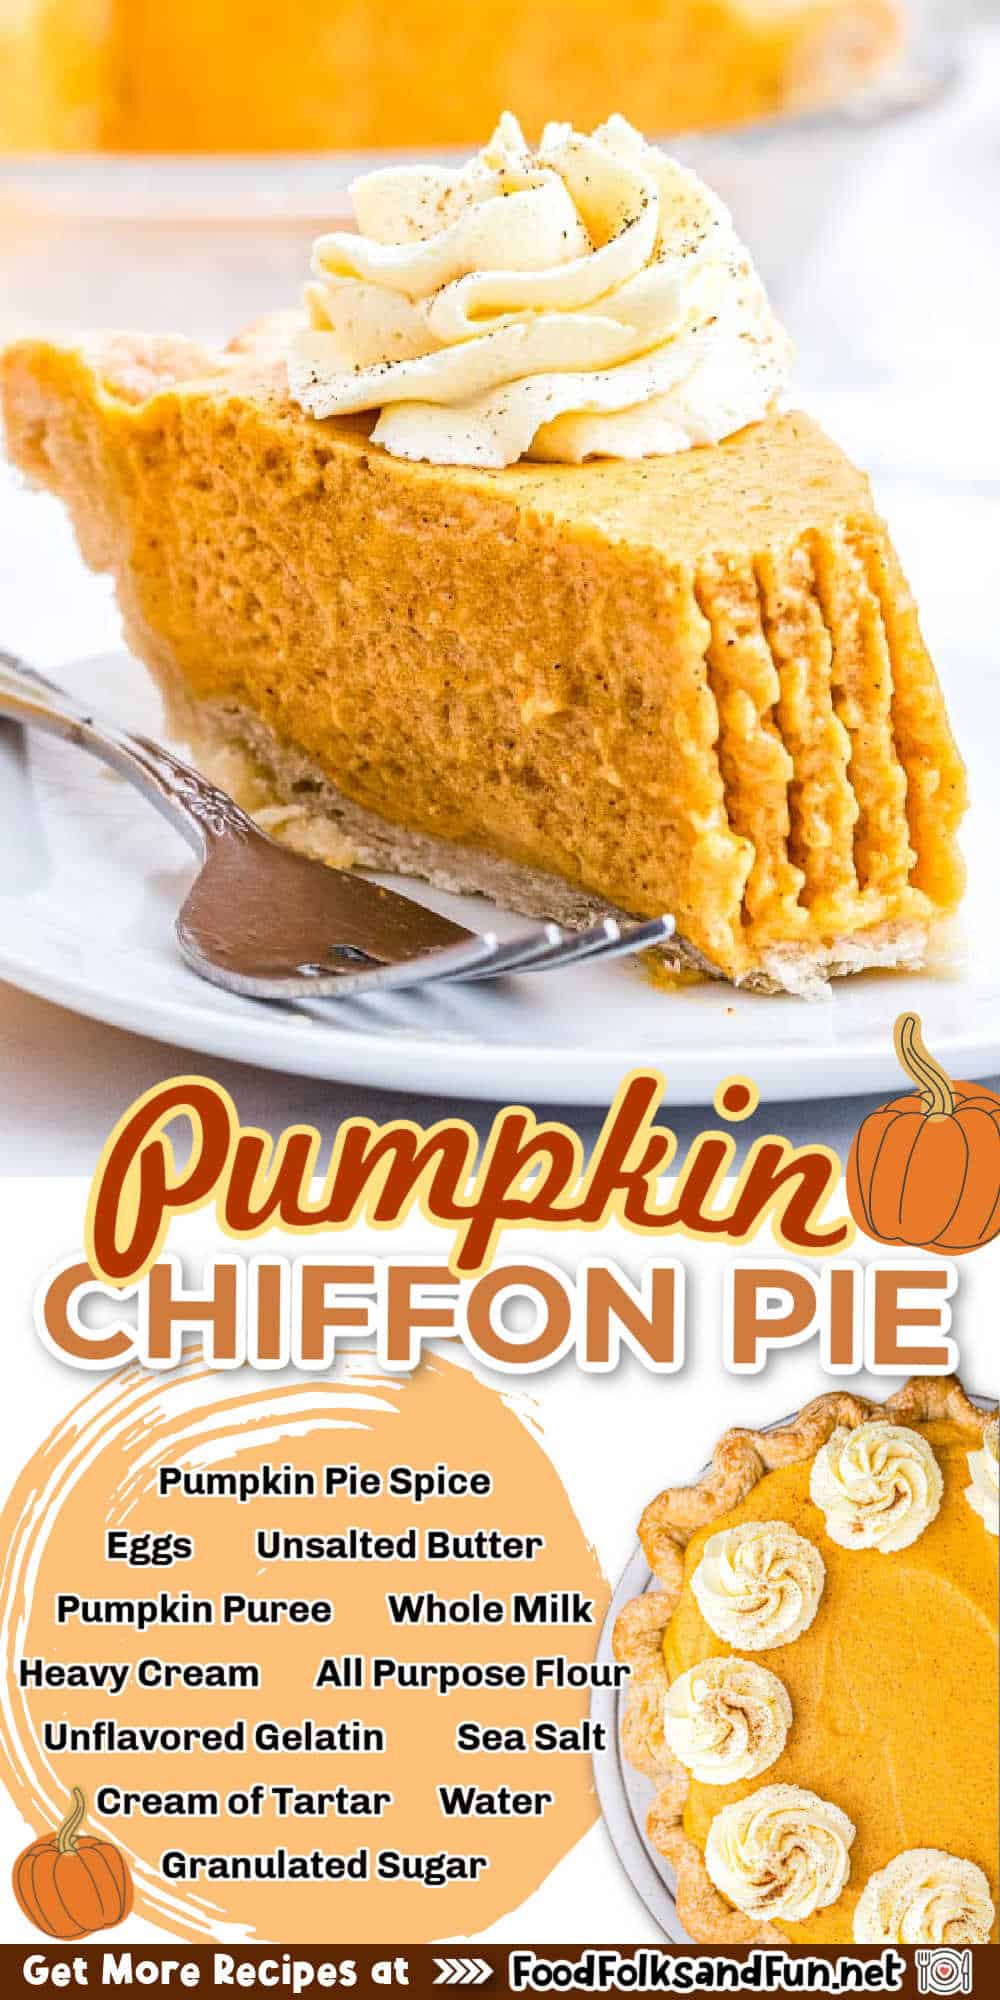 Pumpkin Chiffon Pie has a light, airy pumpkin filling, flaky pie crust, and it’s finished with homemade whipped cream. via @foodfolksandfun